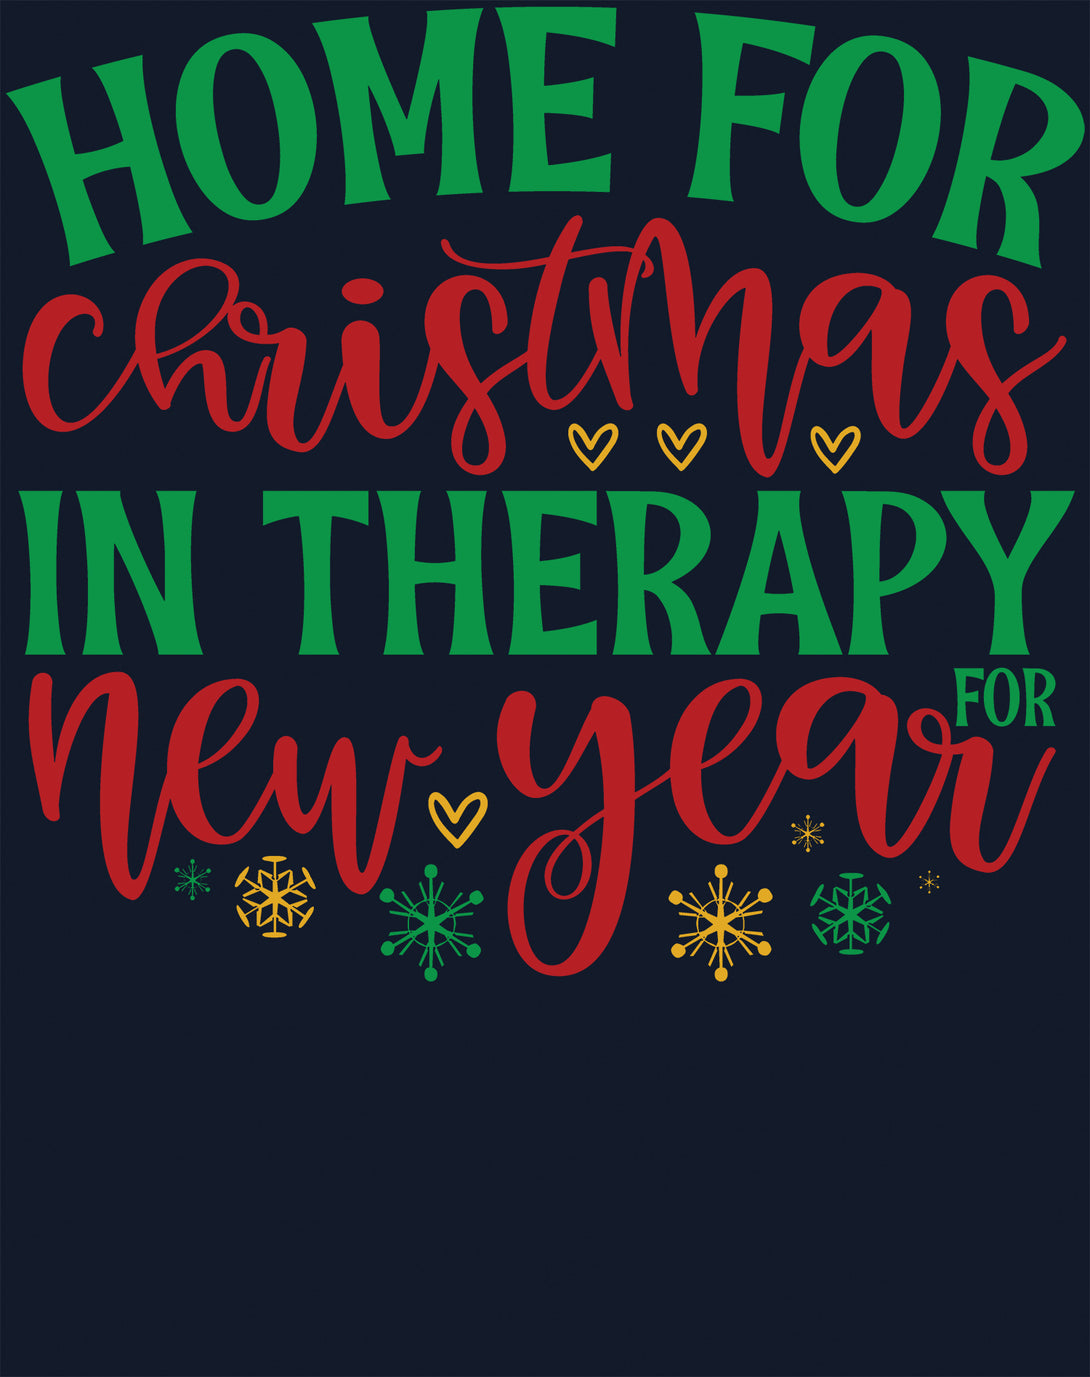 Christmas Therapy Meme Funny Sarcastic Slogan New Year Lol Men's T-Shirt Navy - Urban Species Design Close Up